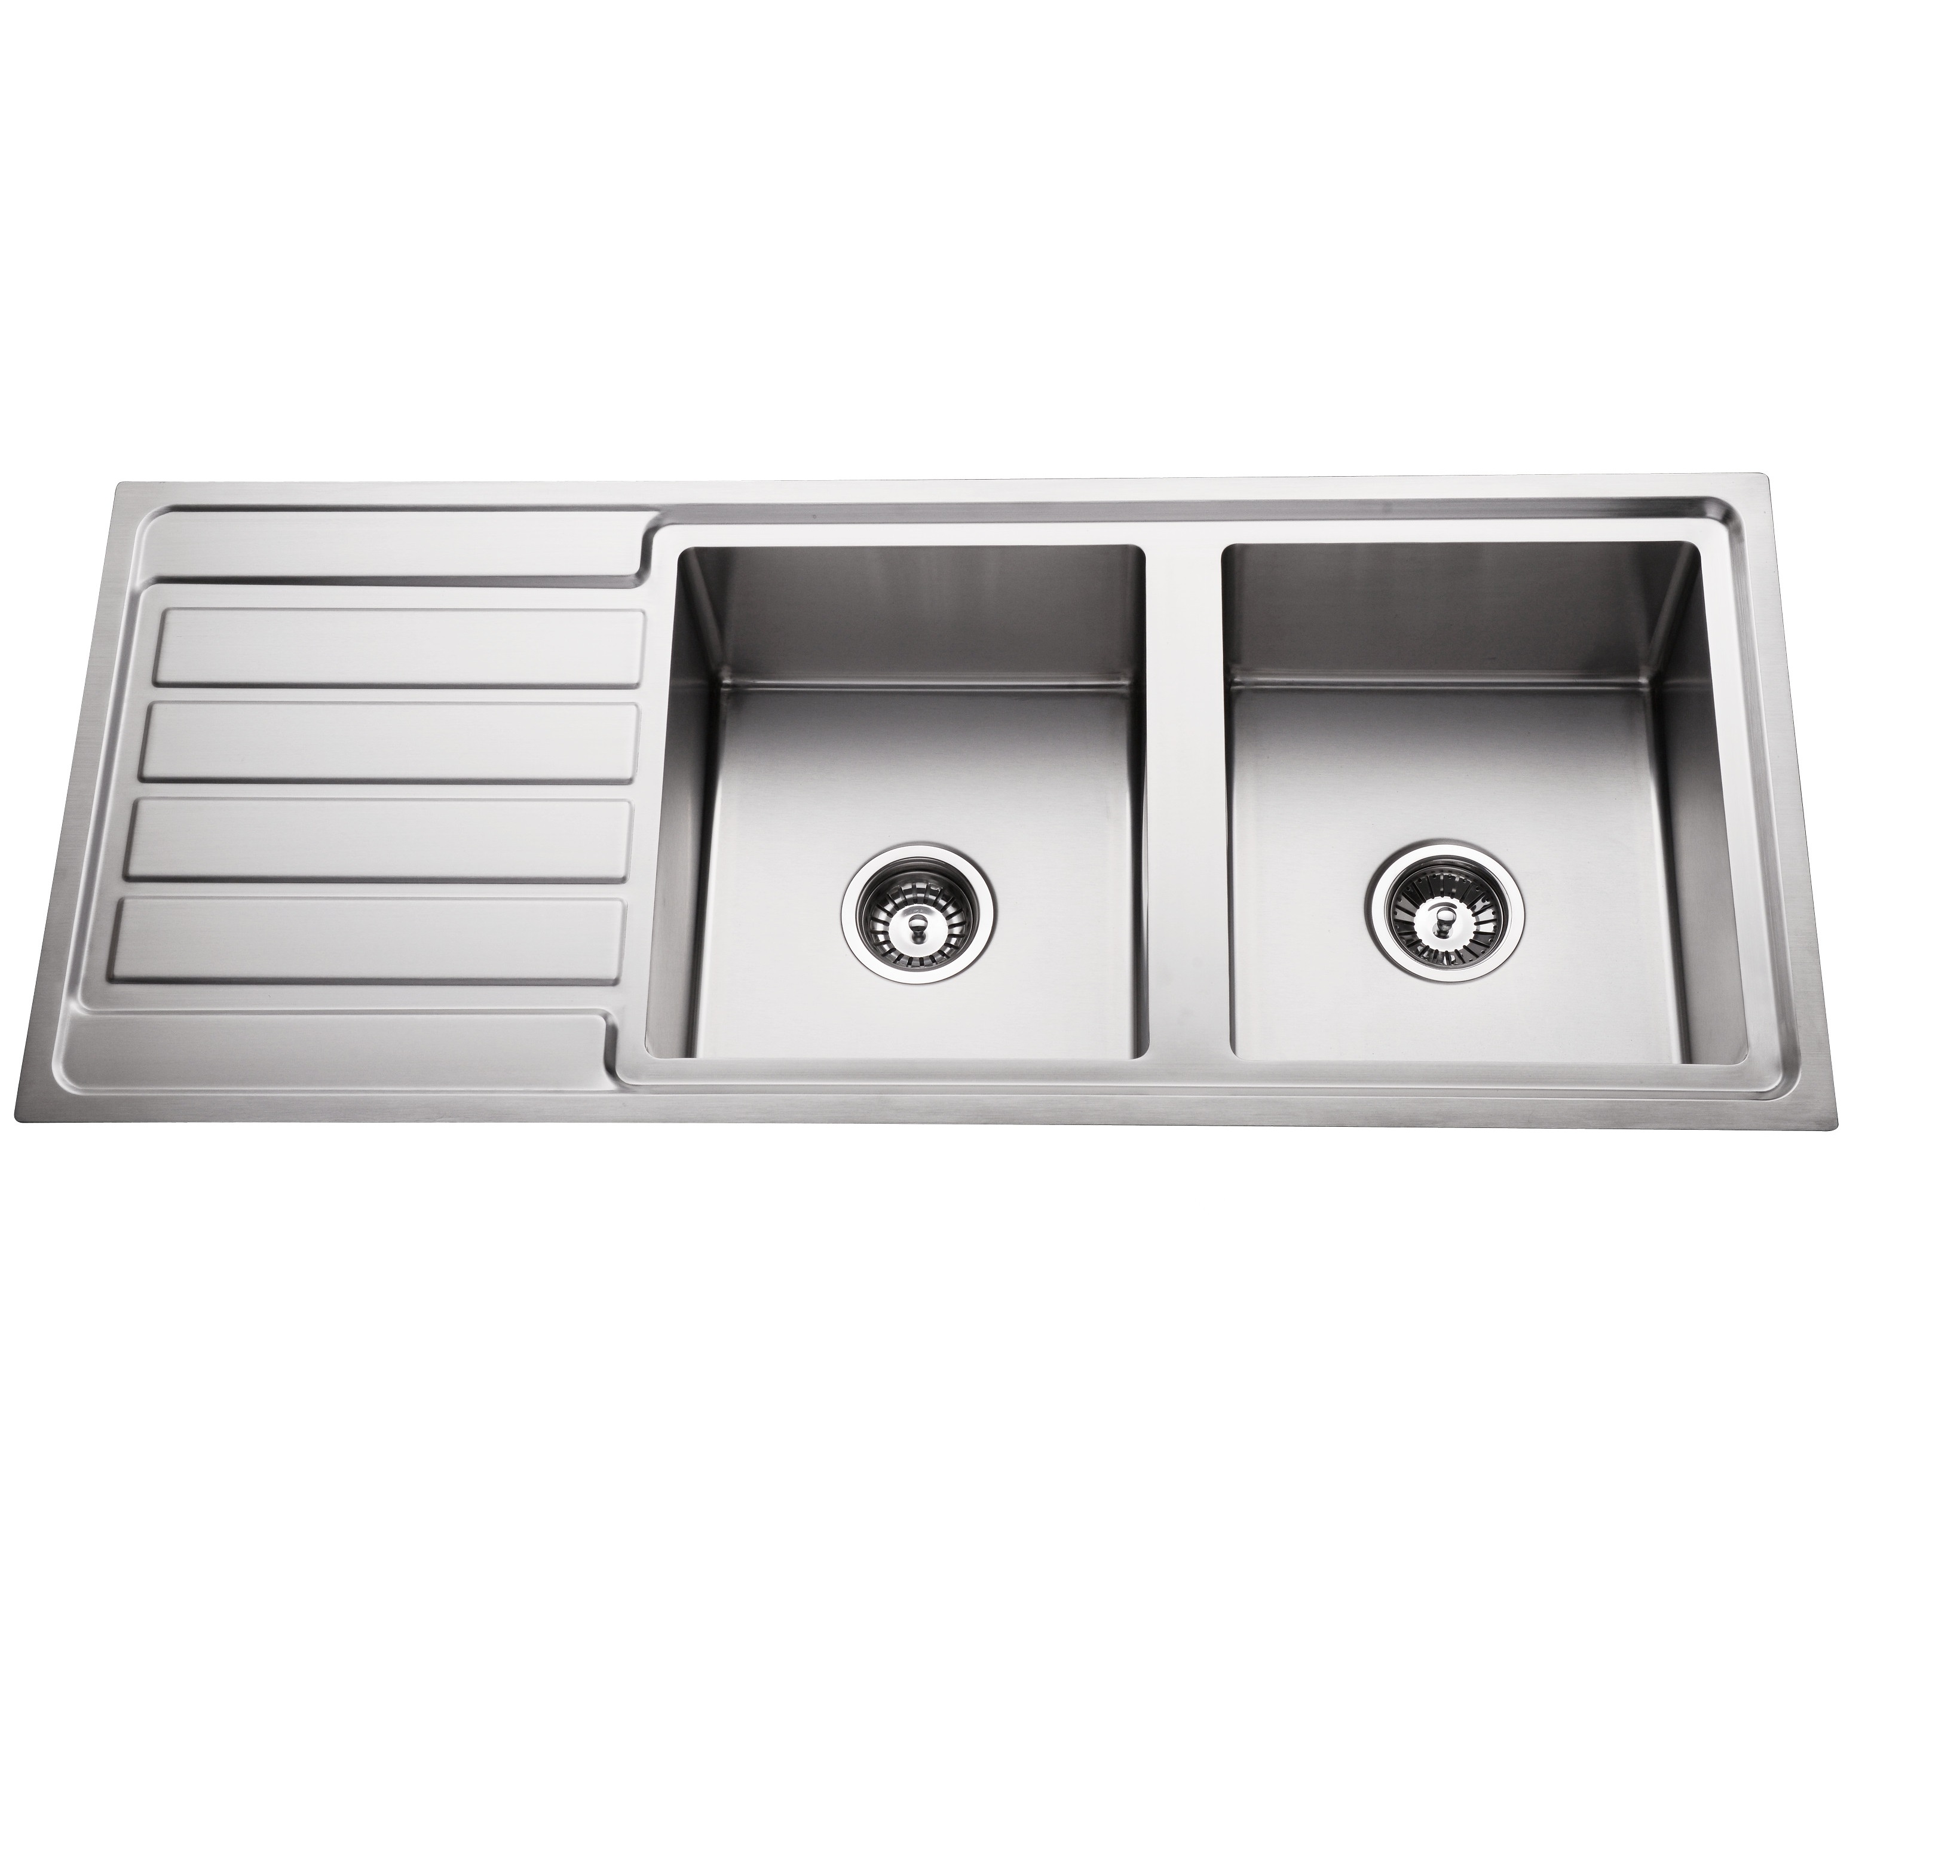 304 Stainless steel double bowl top mount kitchen sink ...